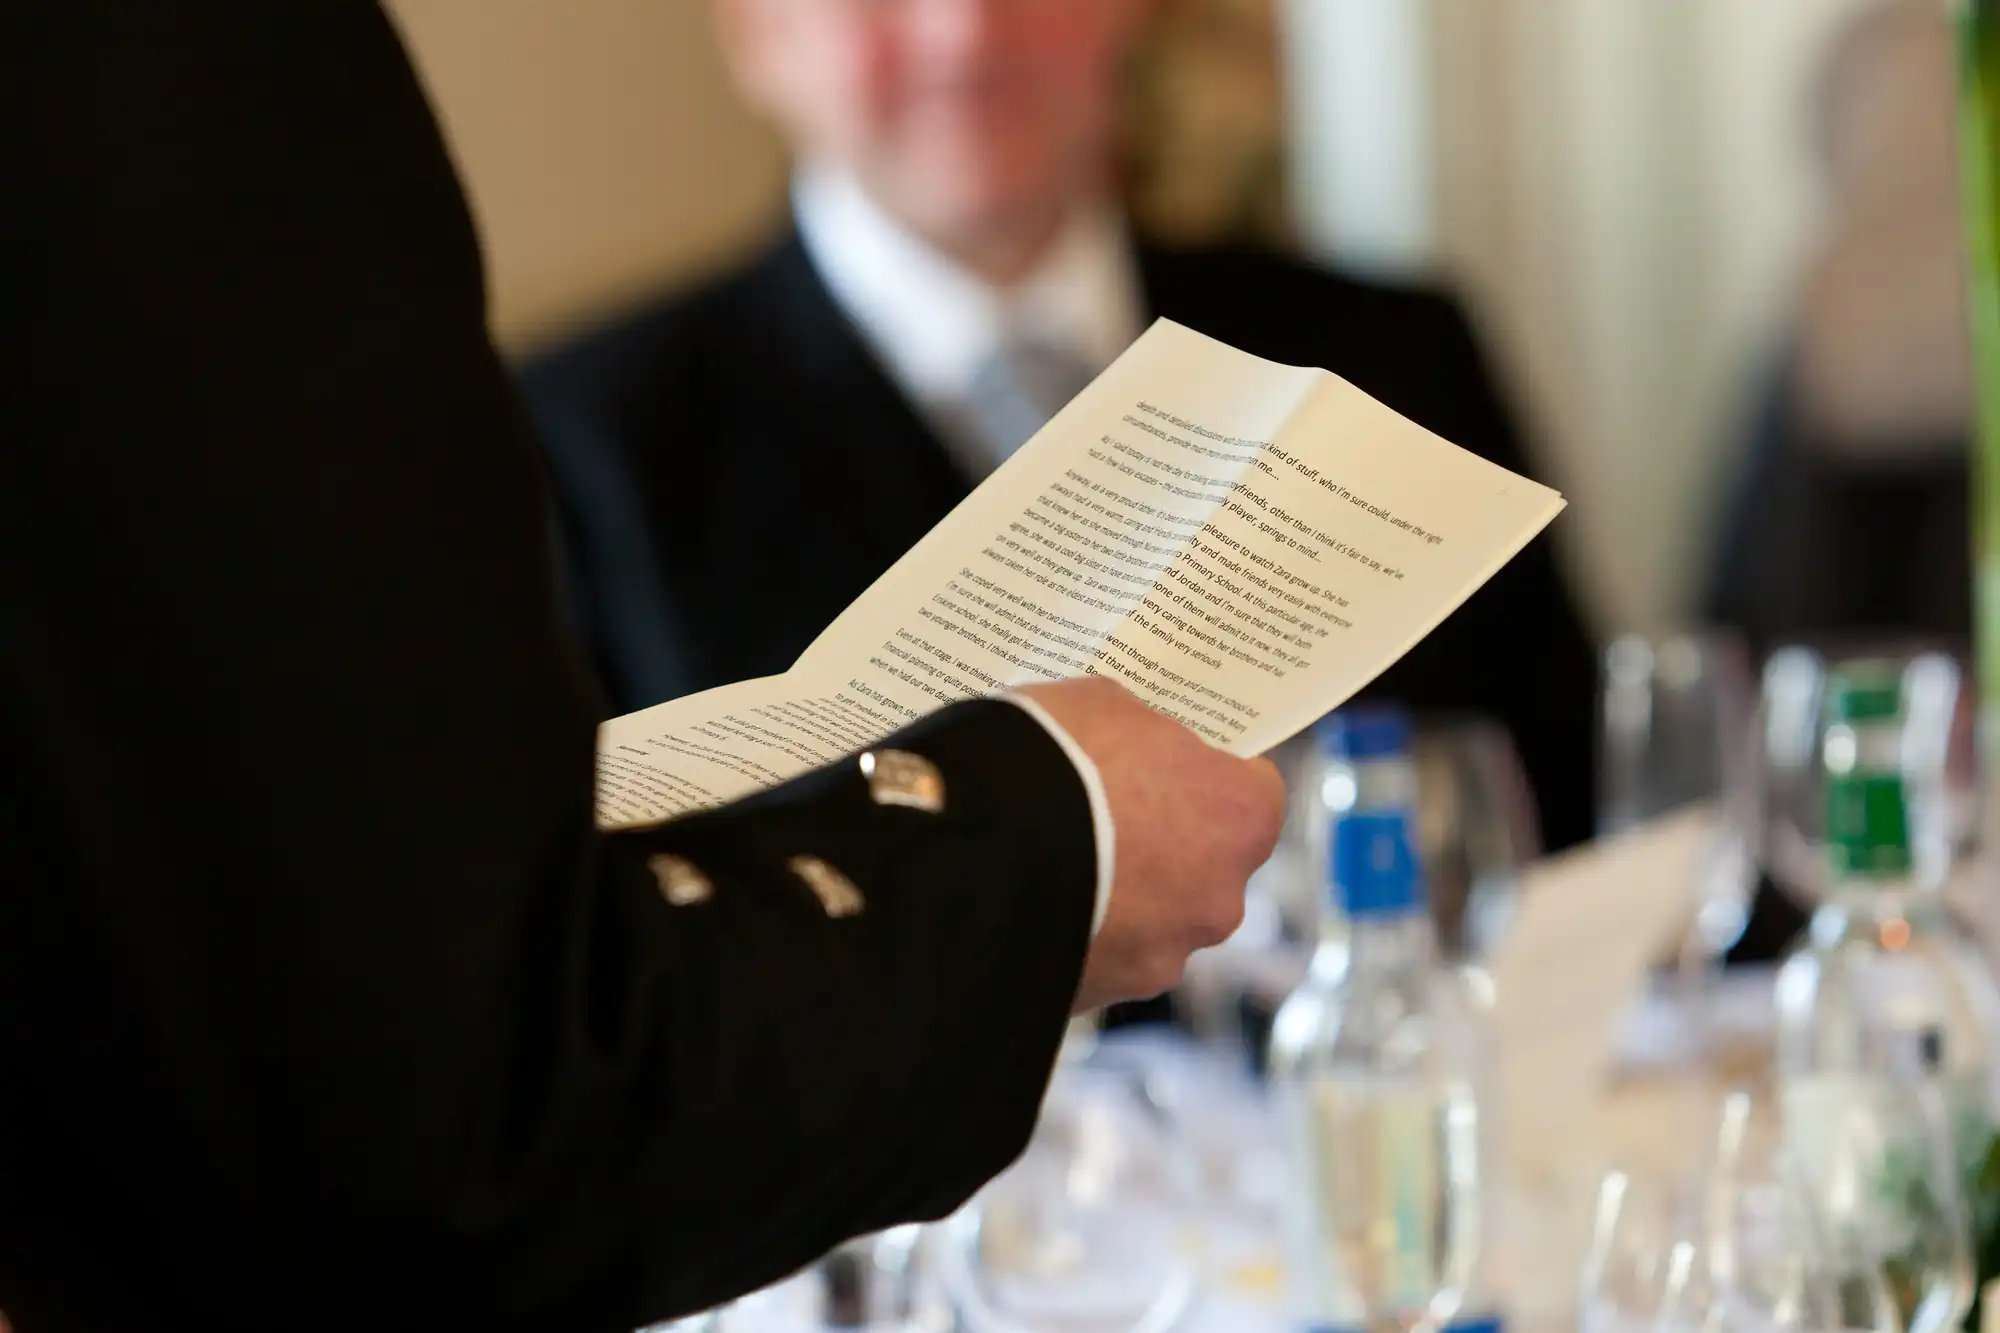 A person holding a document at a formal event, with blurred individuals in the background. focus is on the text of the document.